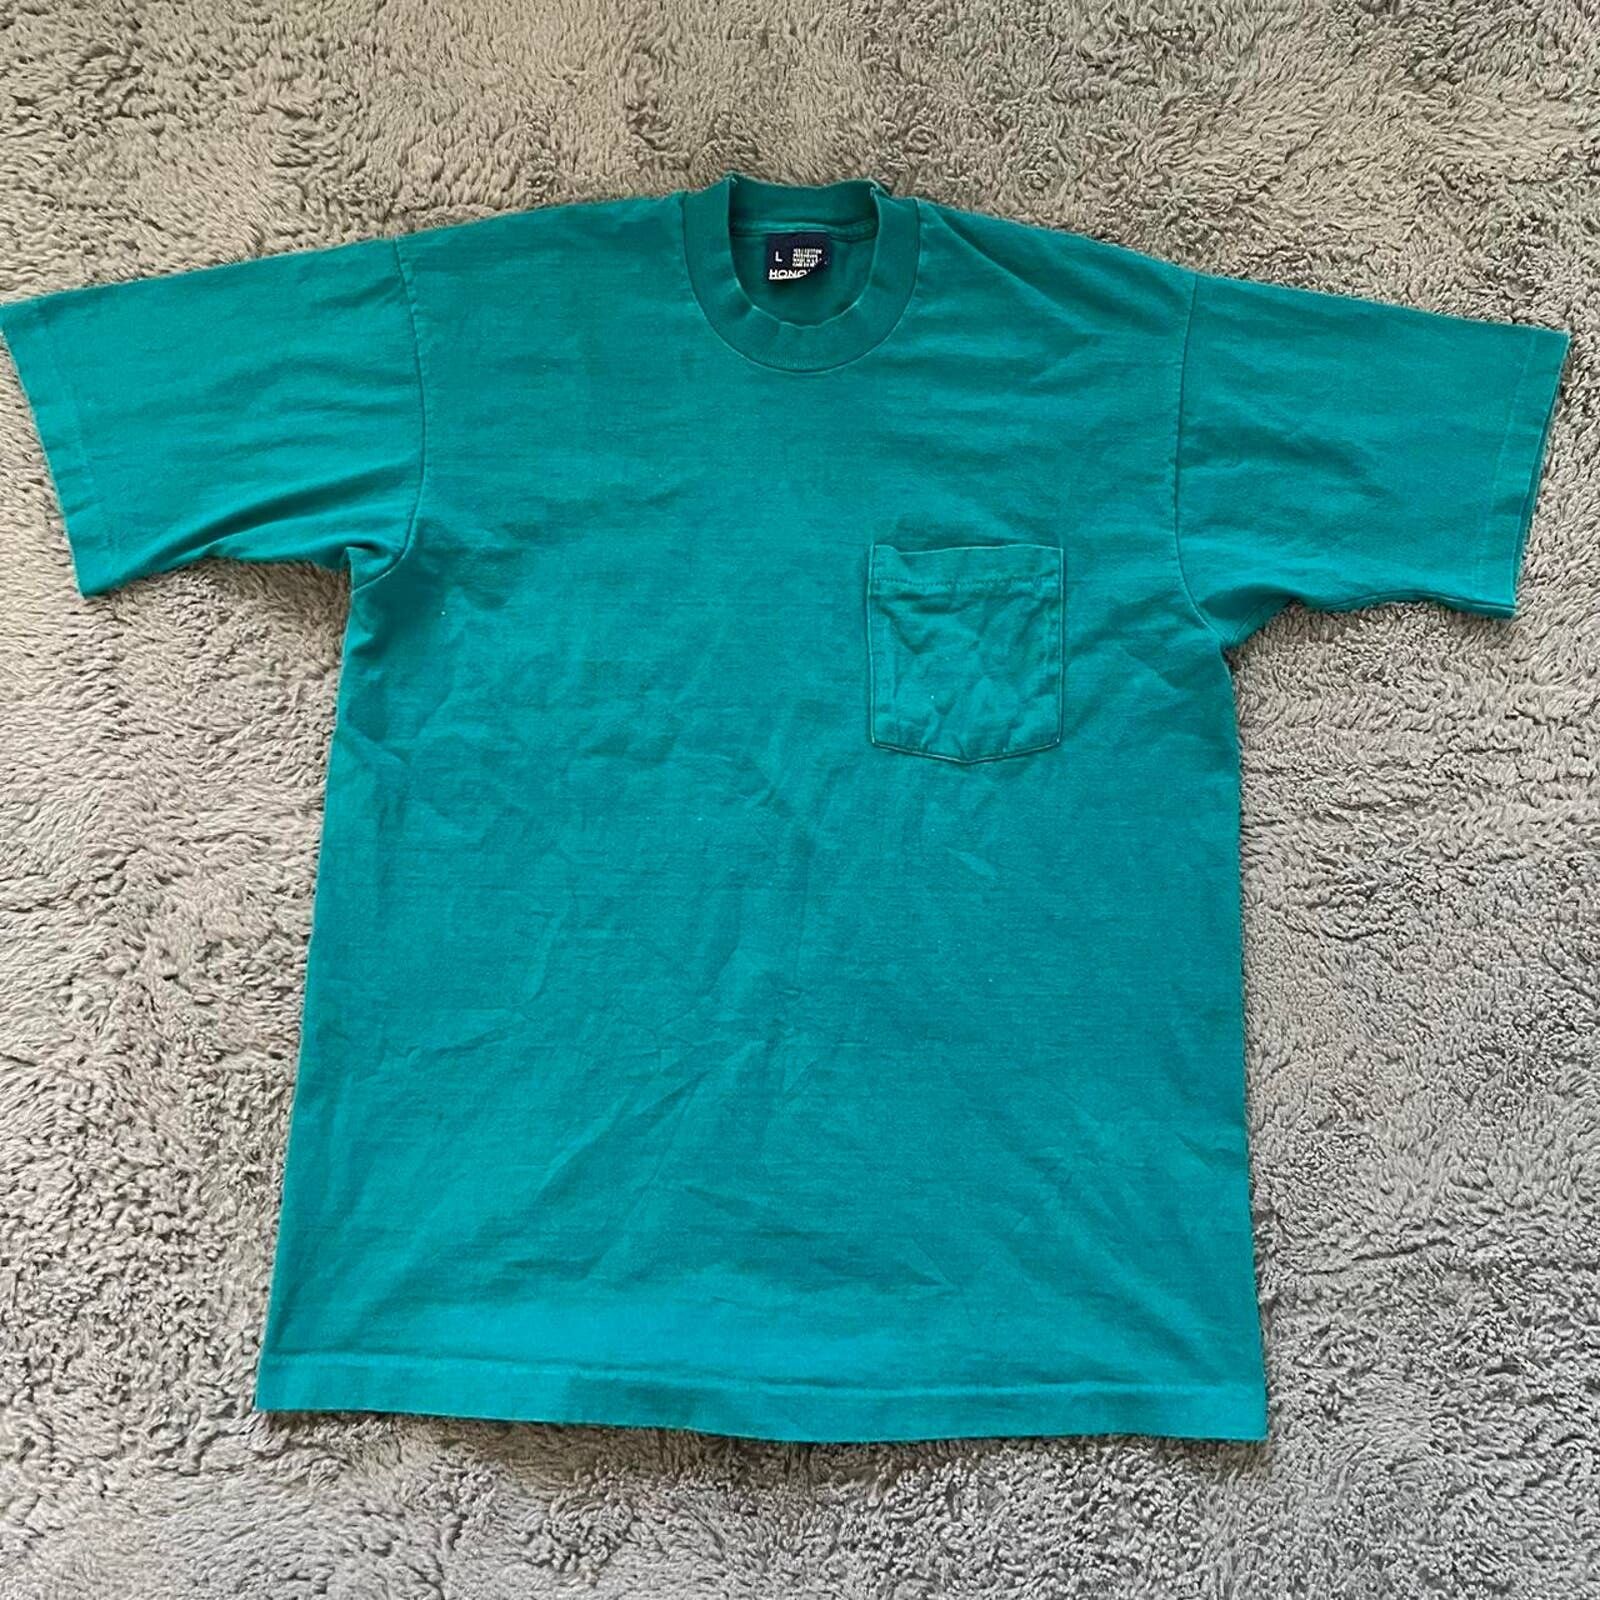 Fruit Of The Loom Blank vintage tee single Size US L / EU 52-54 / 3 - 1 Preview